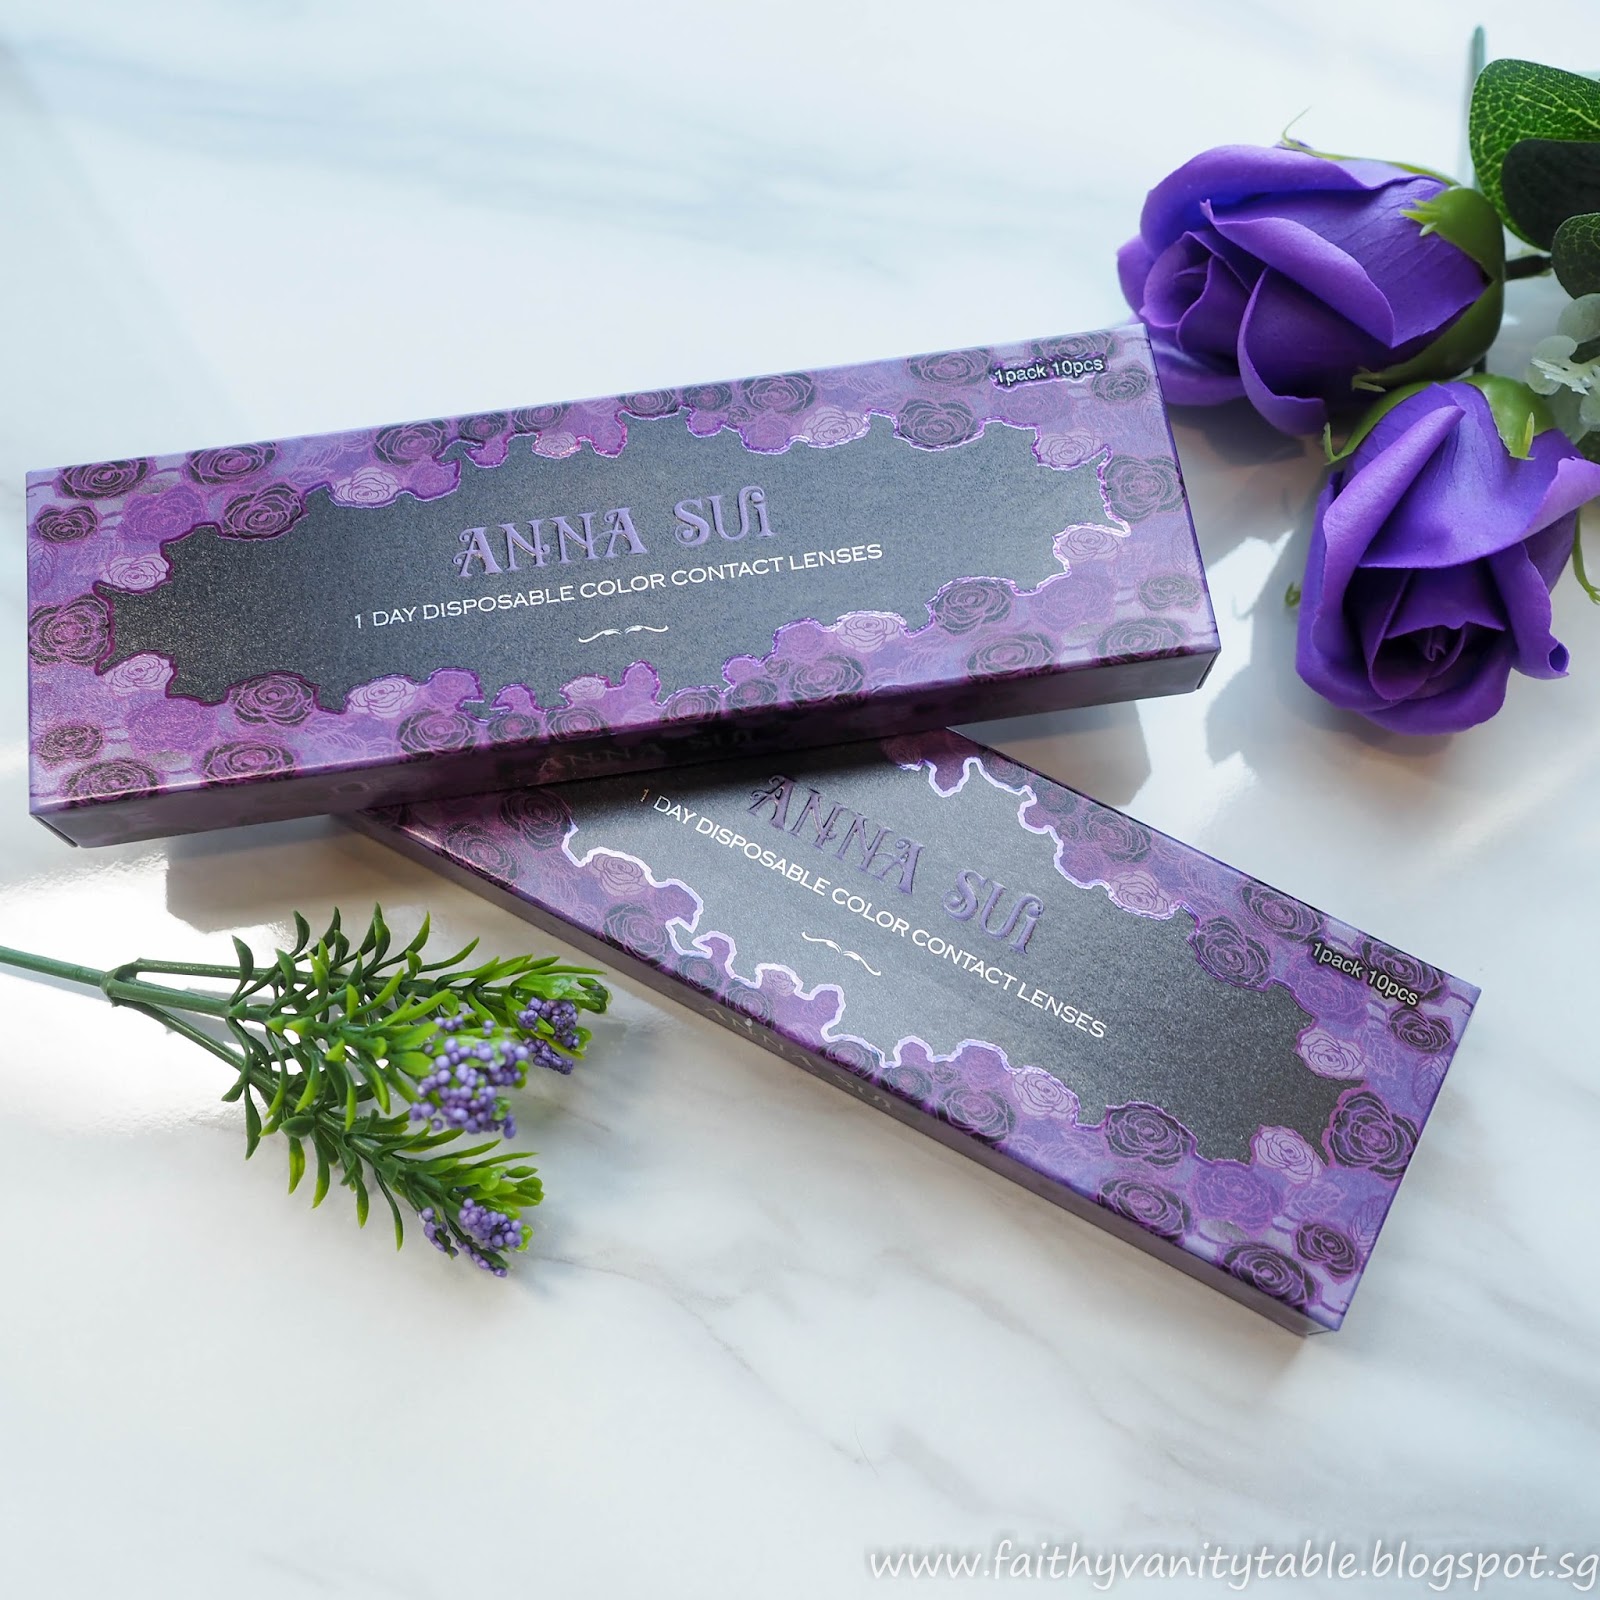 Singapore Beauty, Travel and Lifestyle Blog: Anna Sui Roses 1-Day  Disposable Color Contact Lenses Review (Promo Code at the end!)